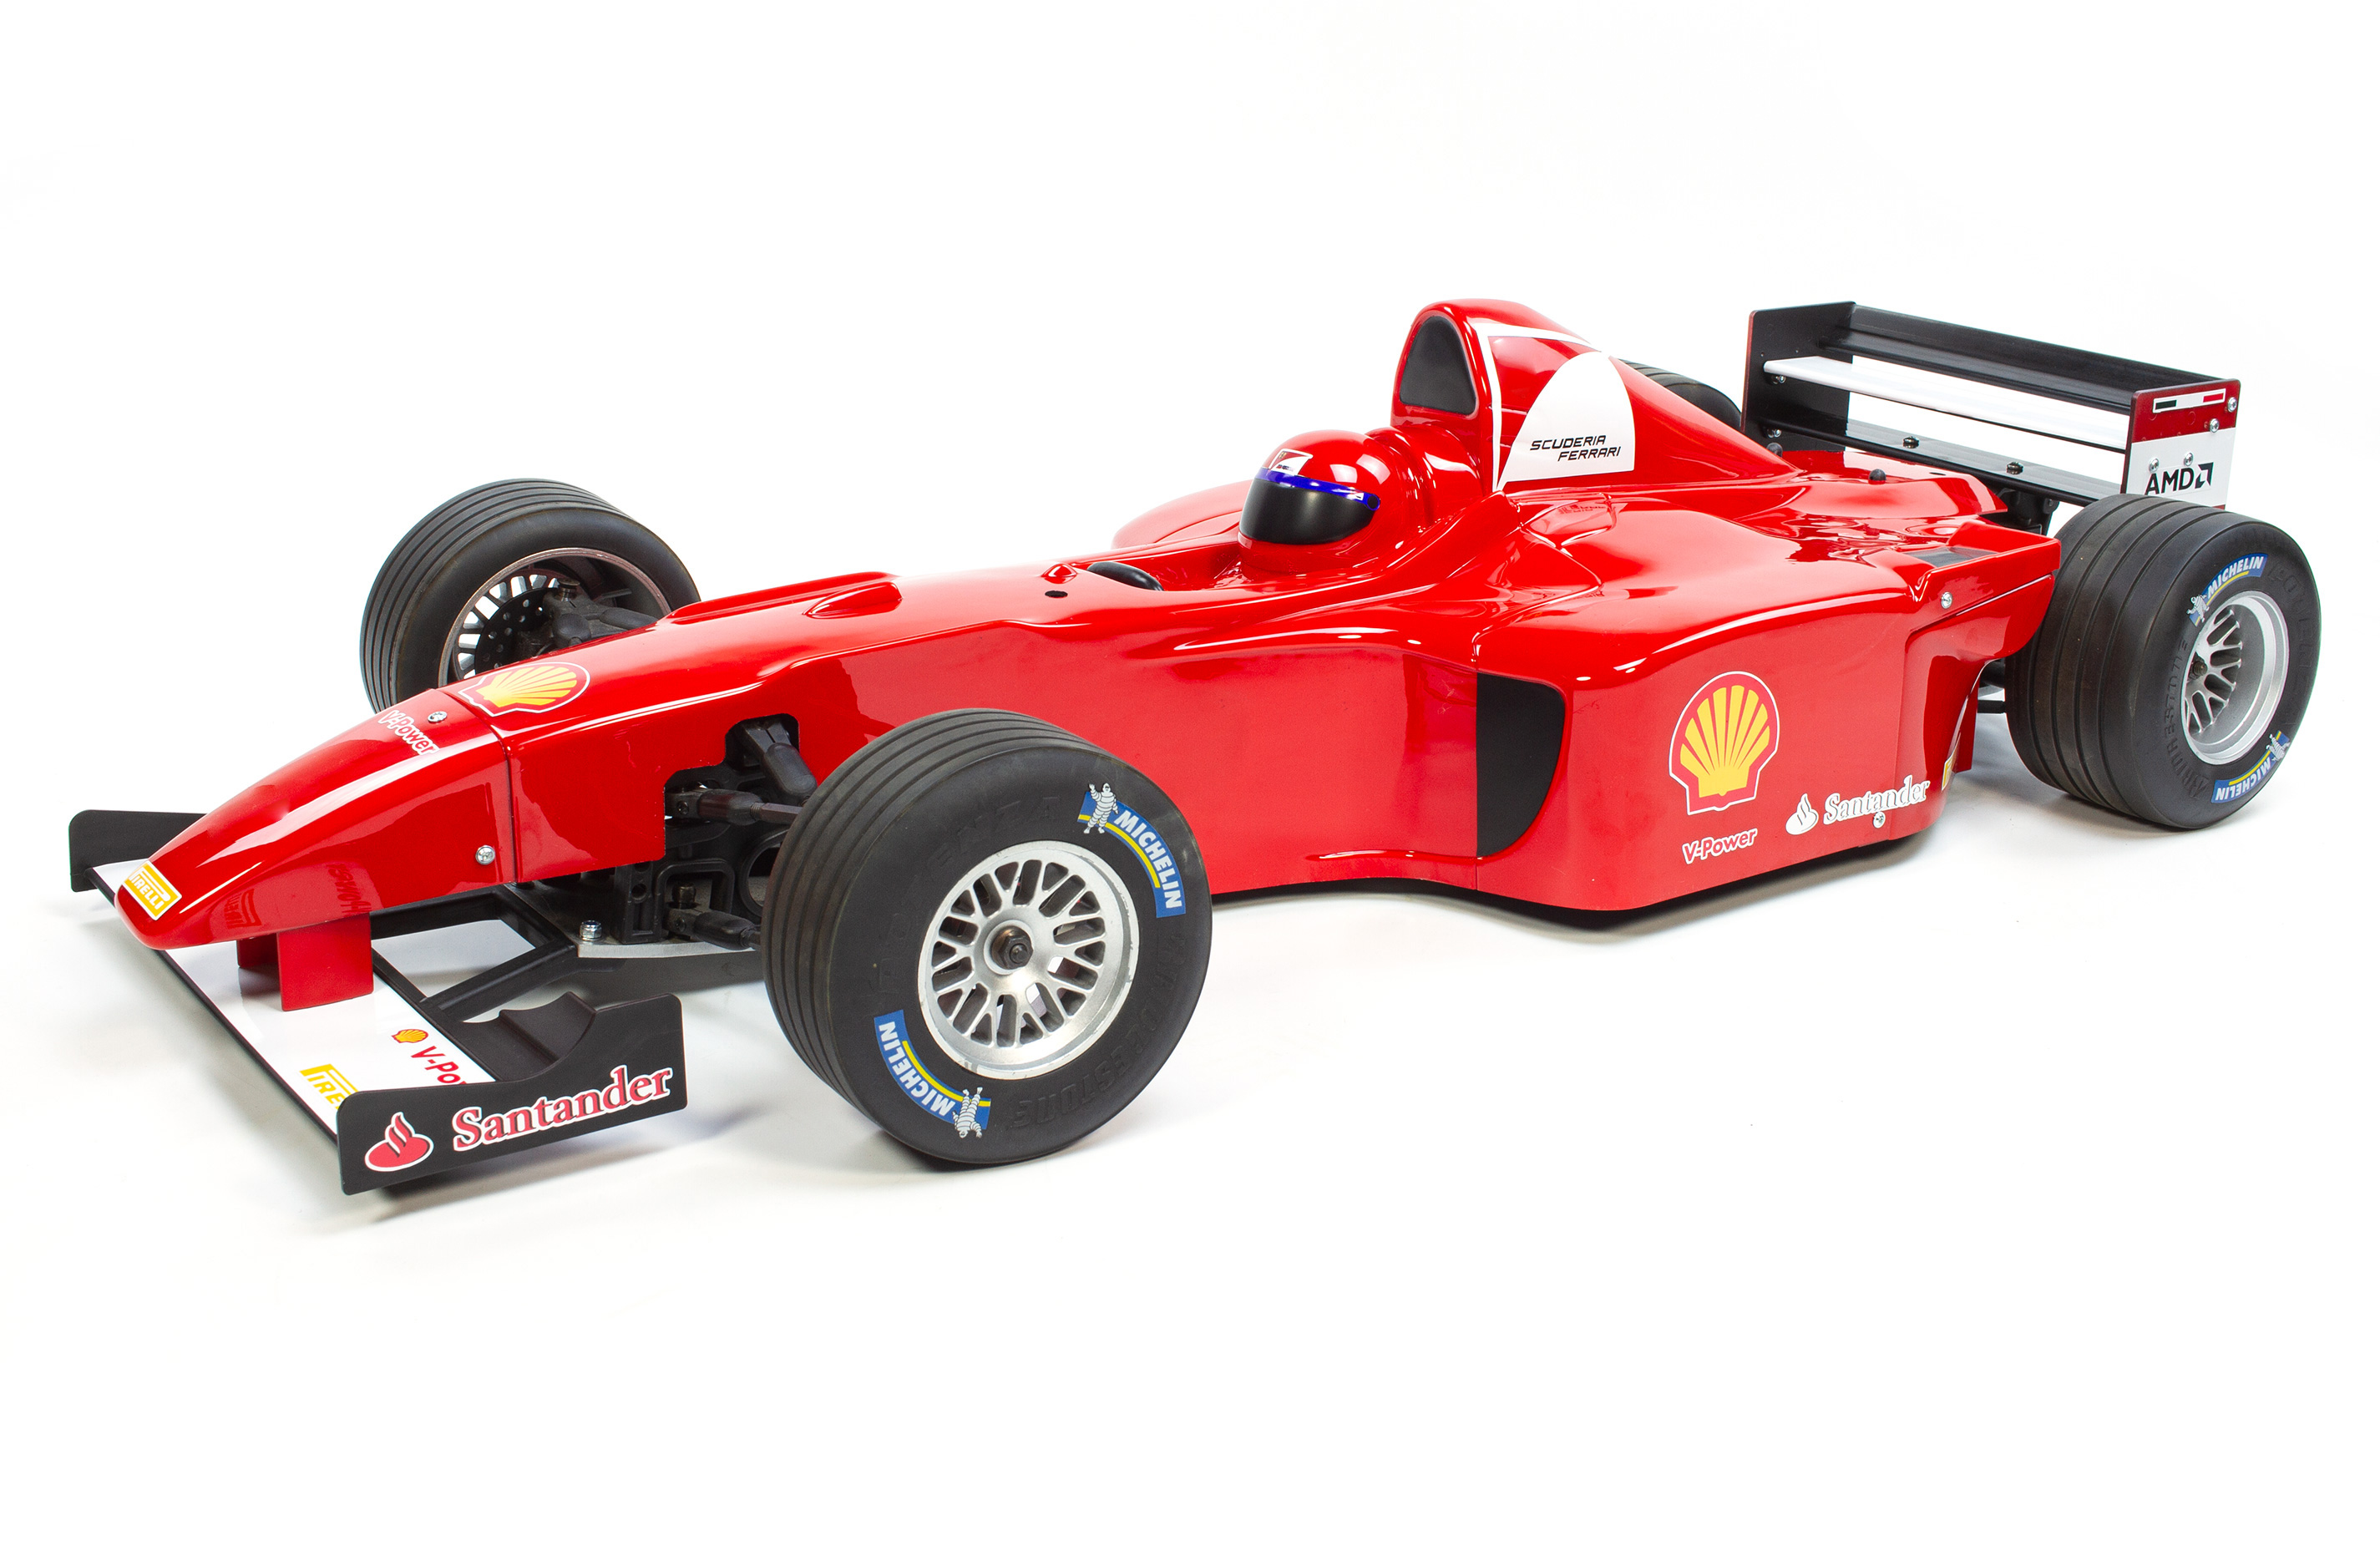 y1568 FG Formula 1 F2000 body shell with individual red F1 painting incl. rear wing and glued front spoiler Single copy